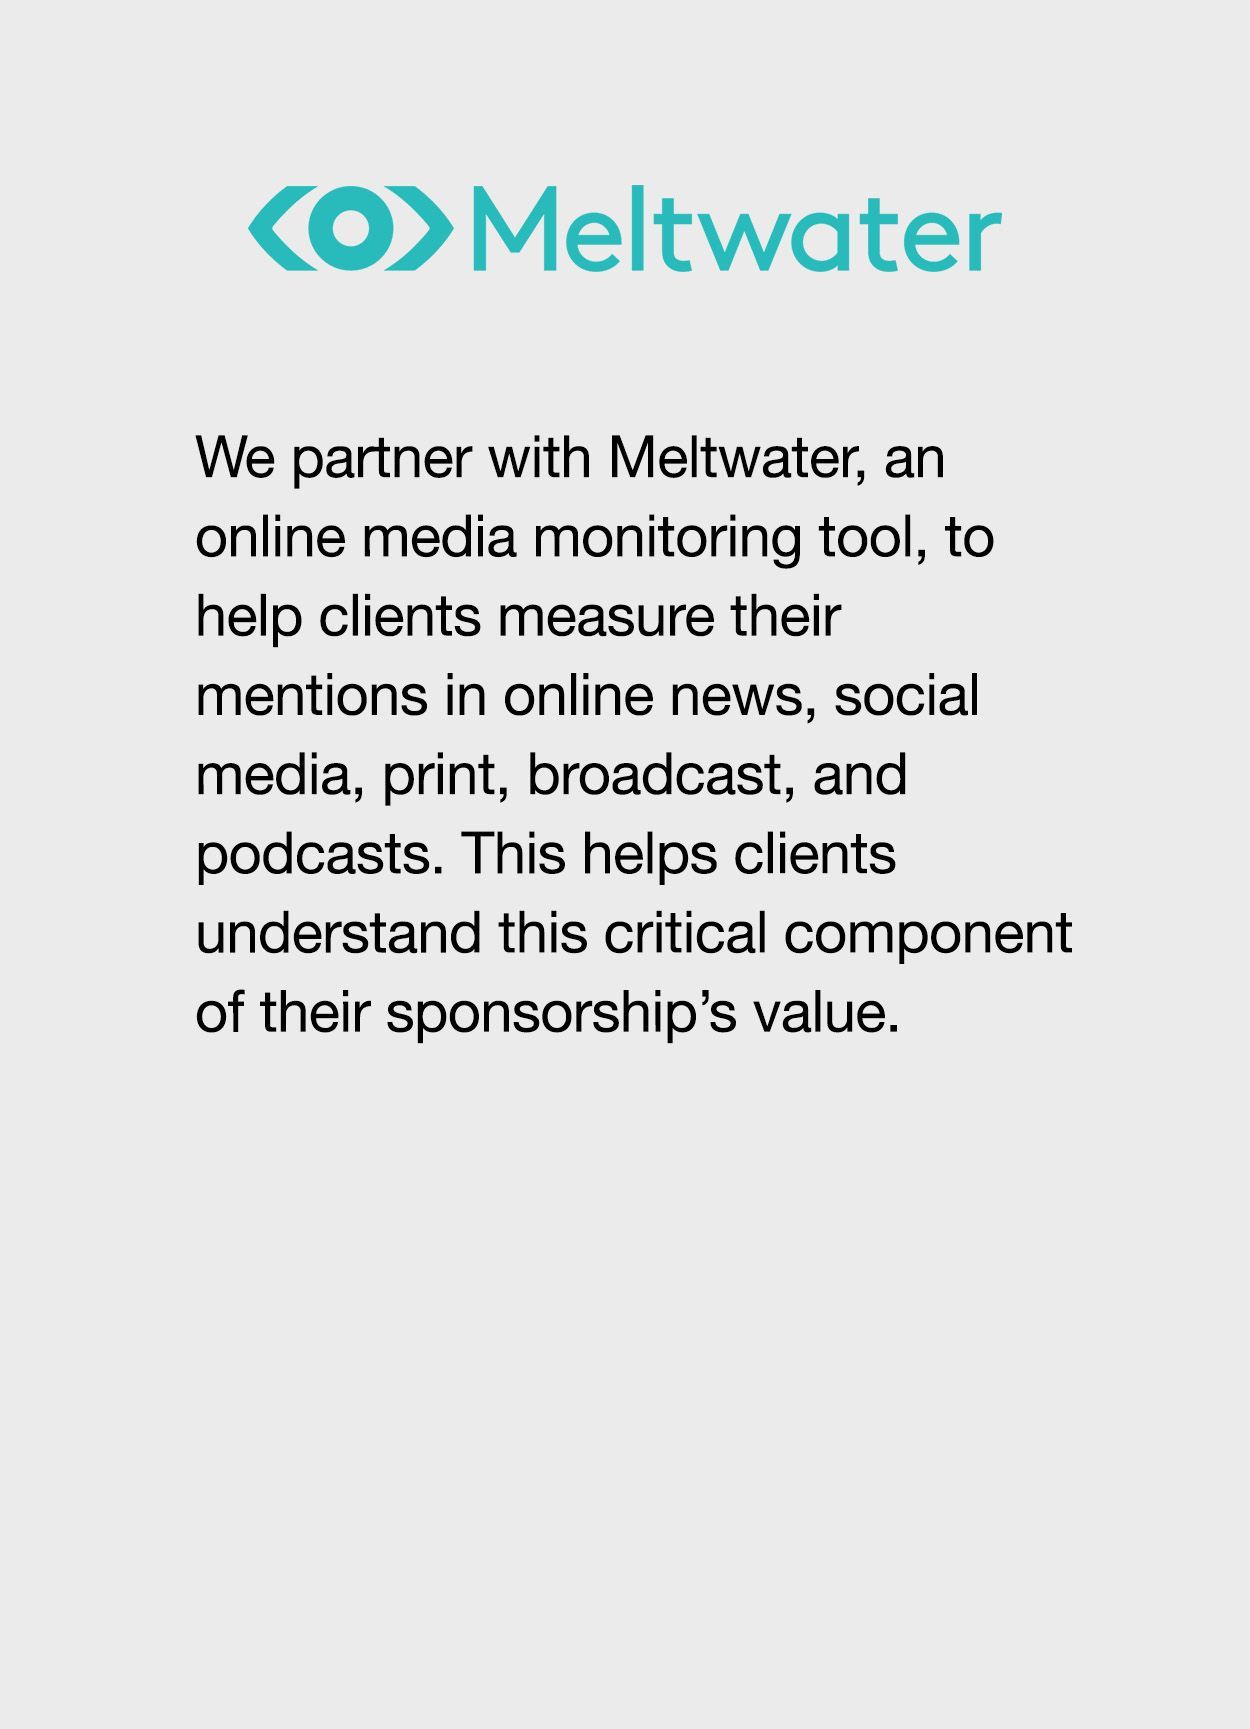 We partner with Meltwater, an online media monitoring tool, to help clients measure their mentions in online news, social media, print, broadcast, and podcasts. This helps clients understand this critical component of their sponsorship’s value.